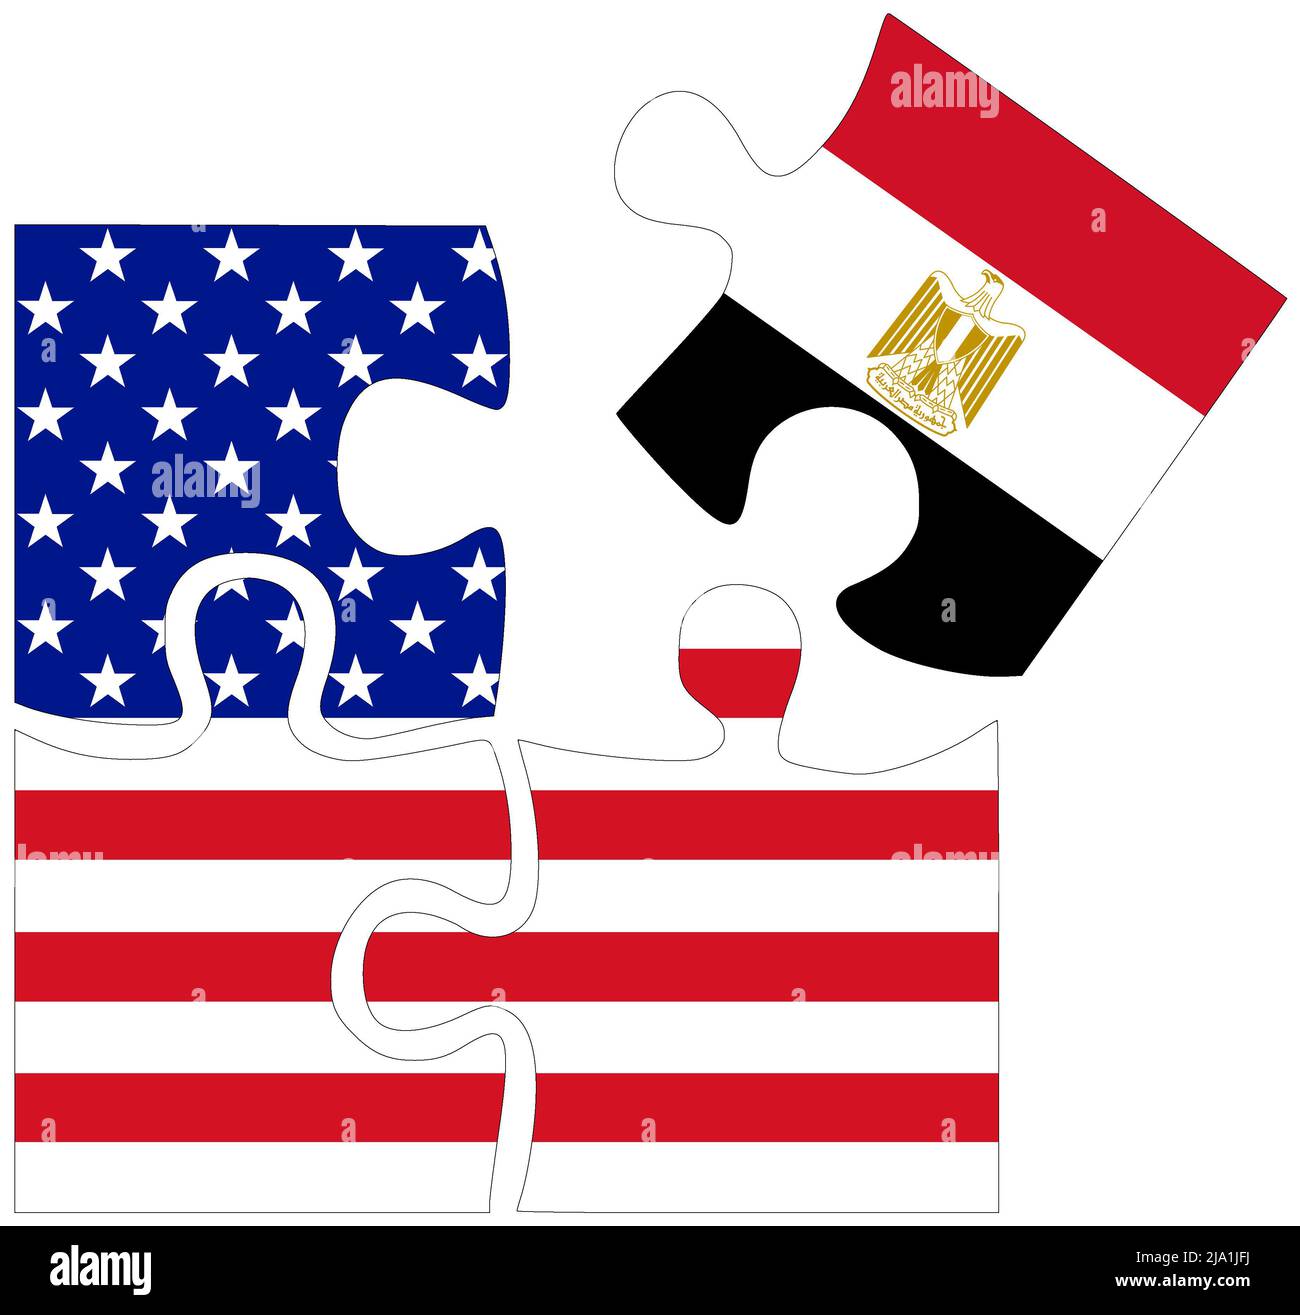 USA - Egypt : puzzle shapes with flags, symbol of agreement or friendship Stock Photo